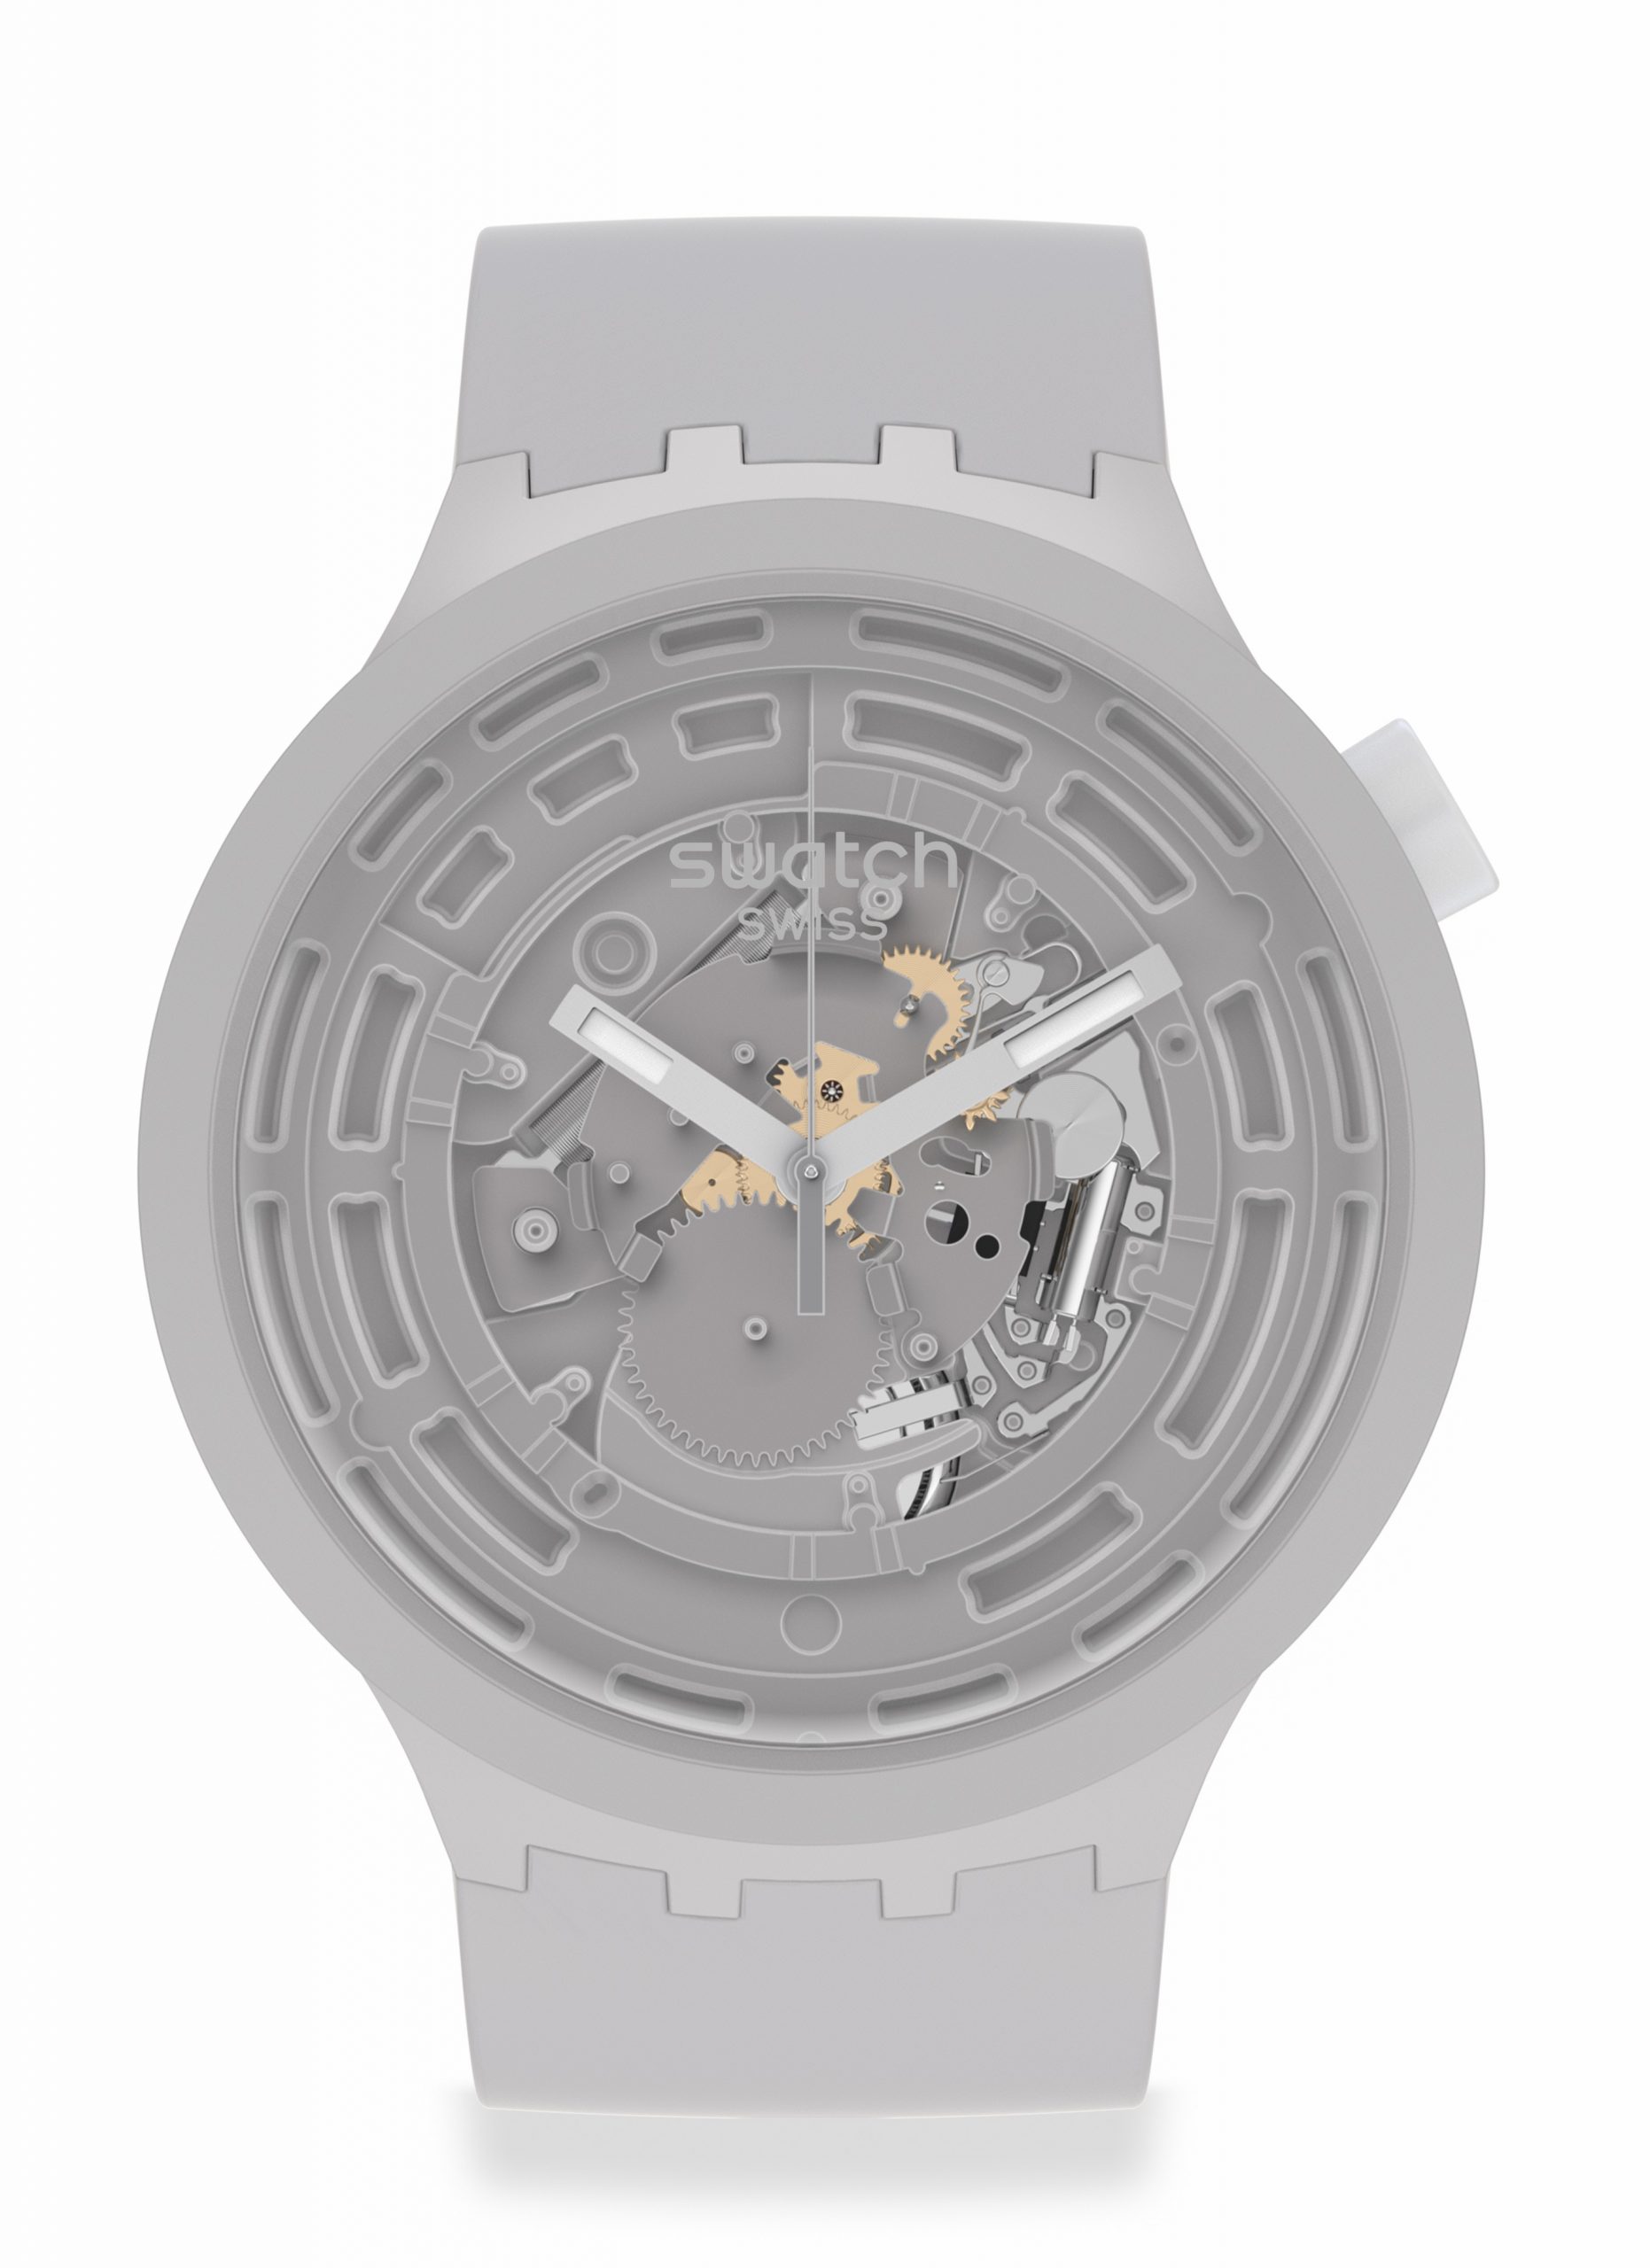 Swatch Introduces Their First-Ever Bioceramic Watch, Starting With The ...